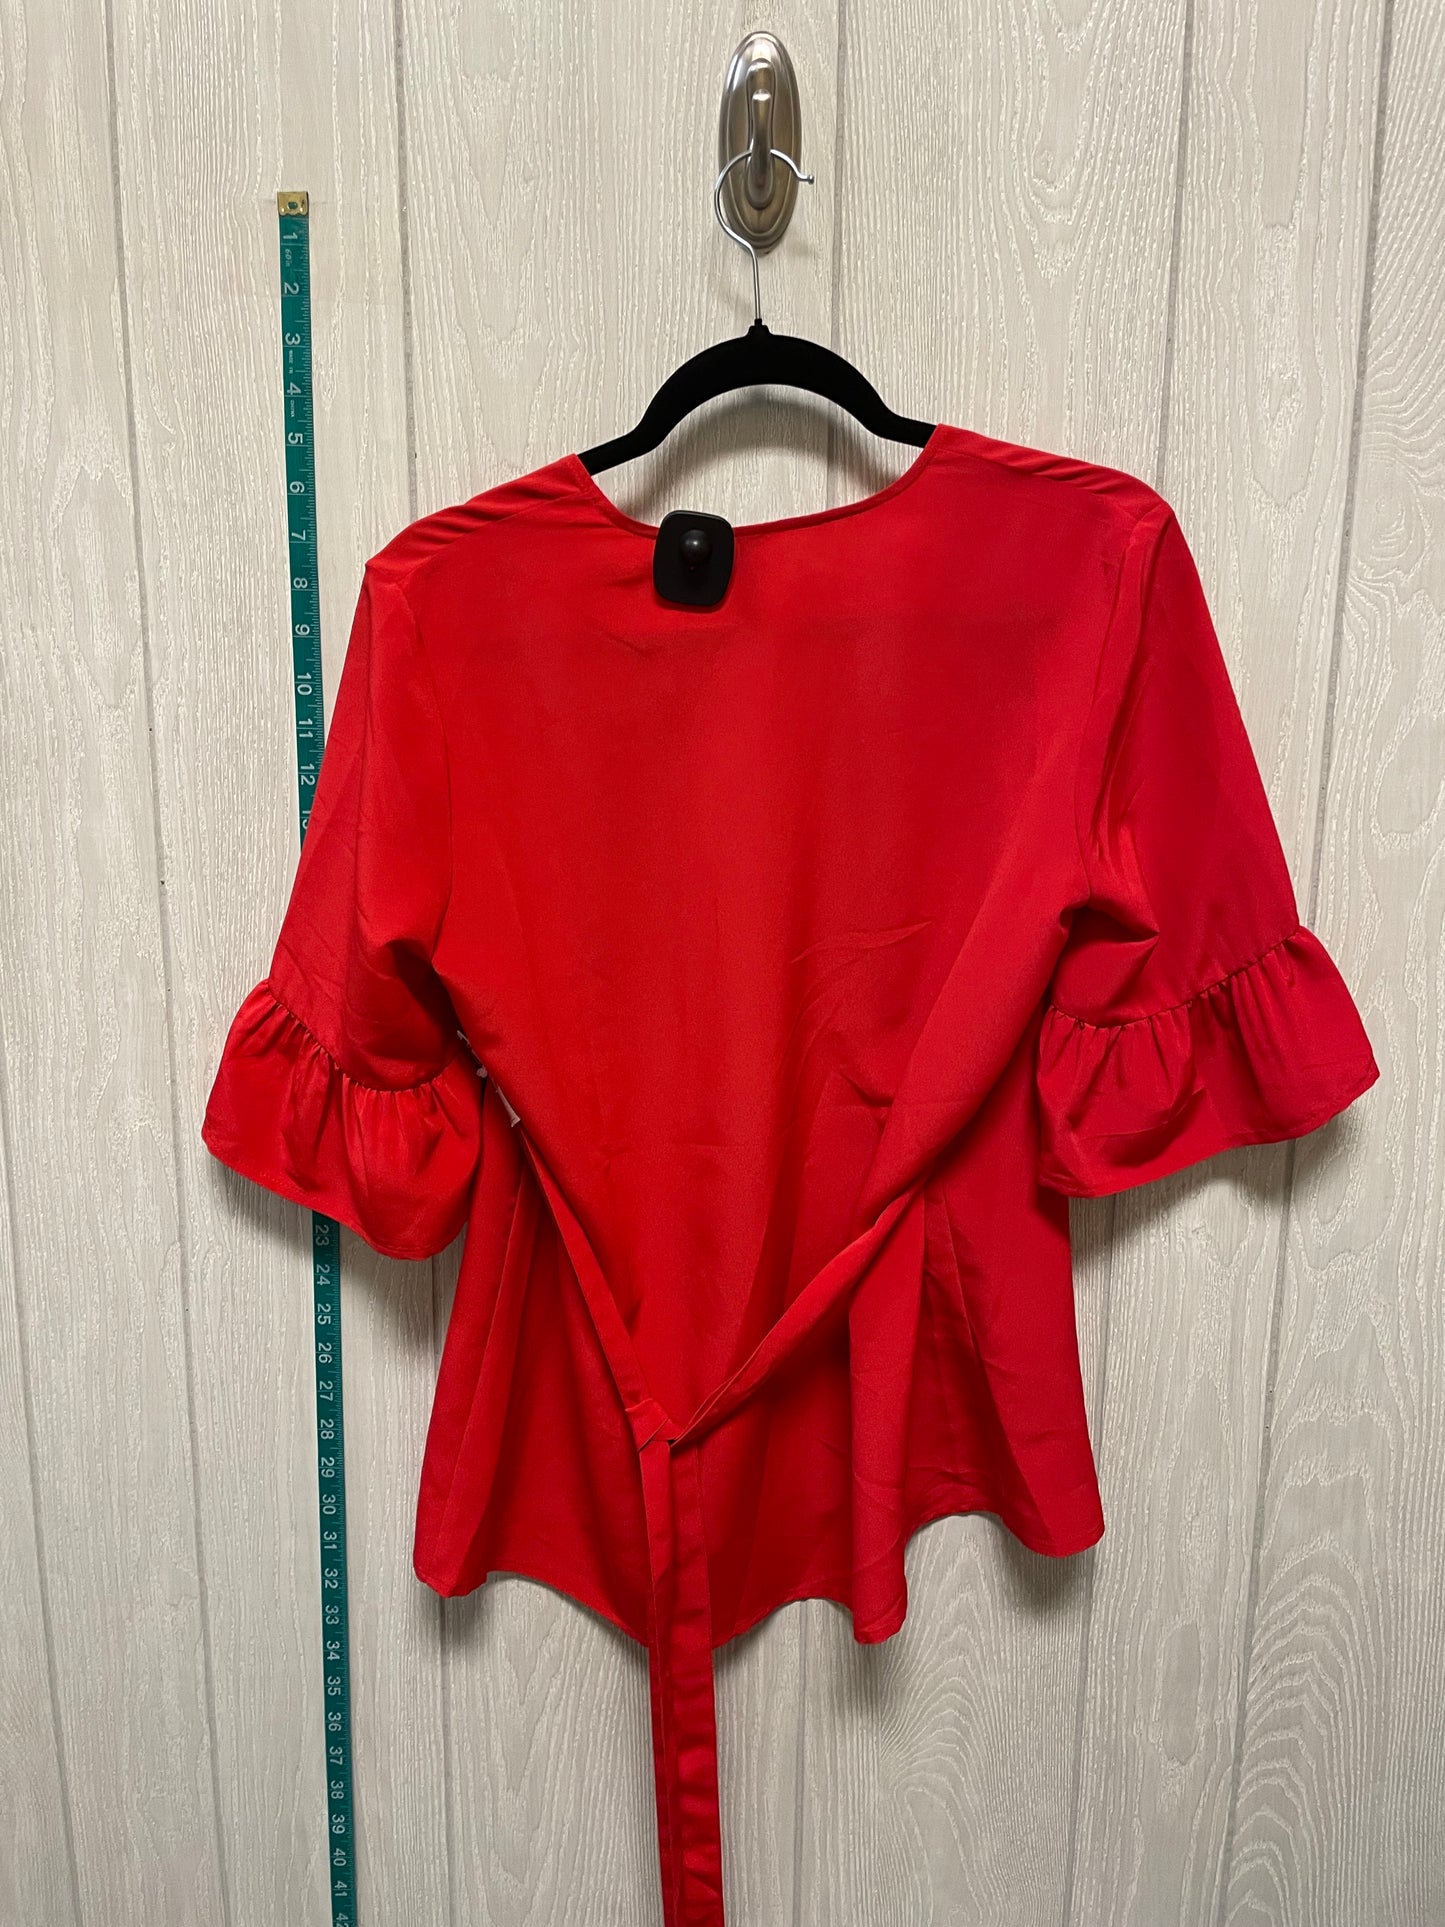 Blouse Short Sleeve By Draper James  Size: S